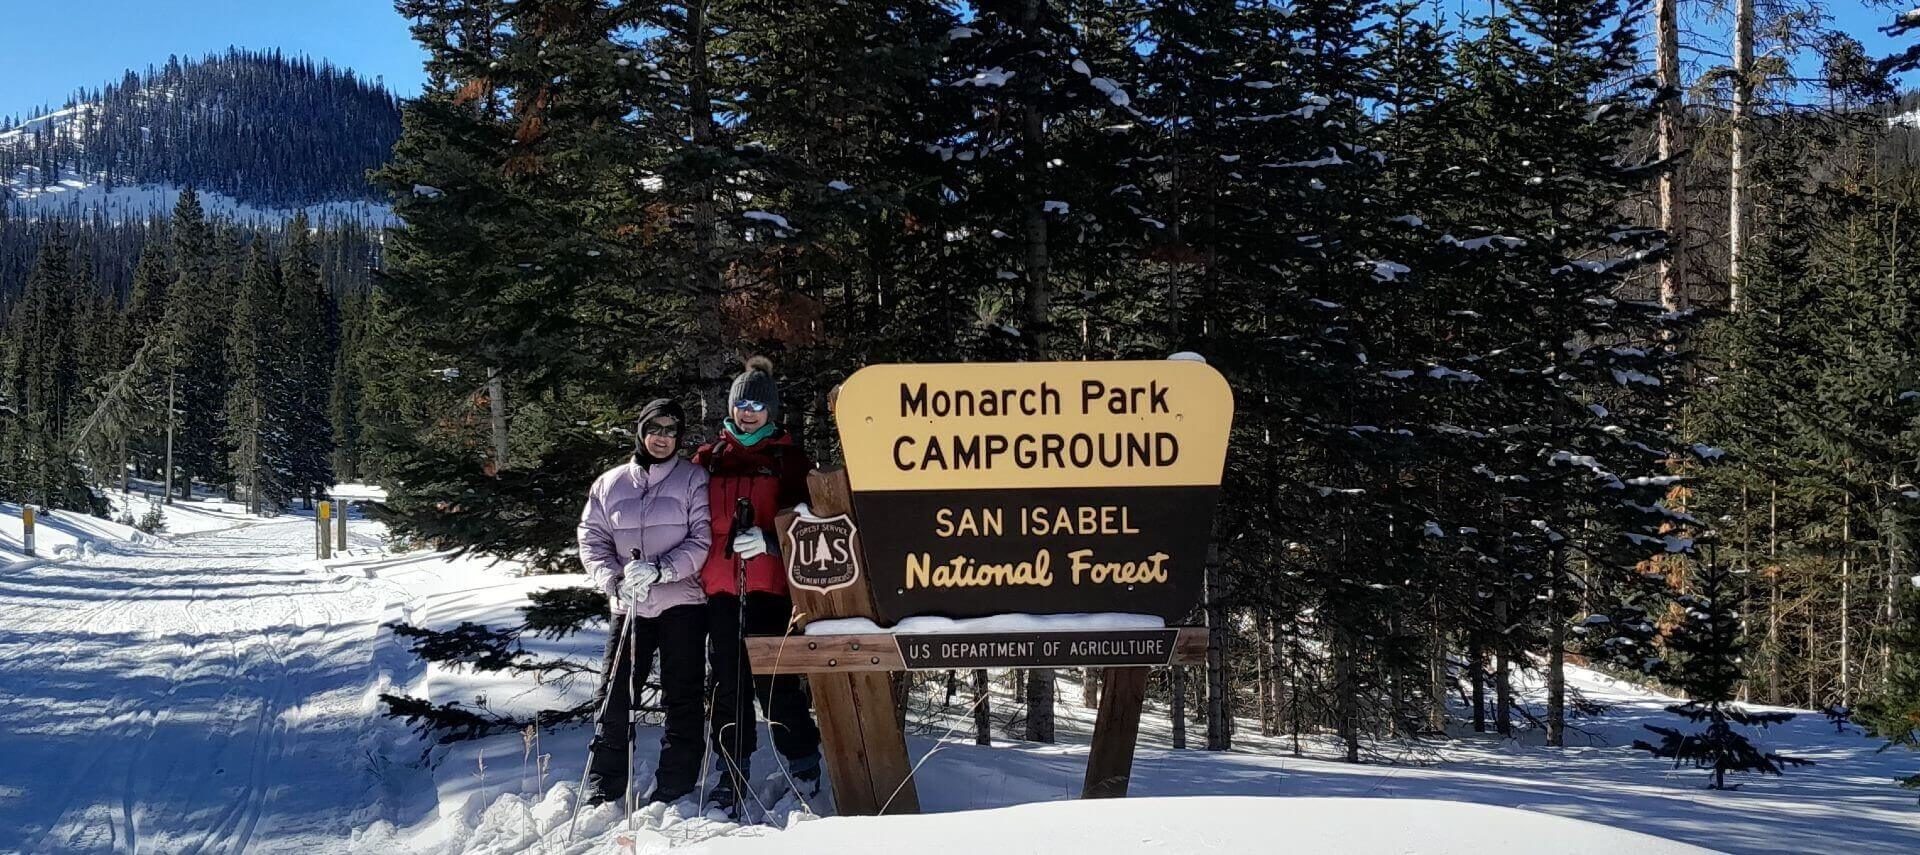 Winter day, blue sky, snow all around in the forest with 2 ladies cross country skiing standing by a sign that says Monarch Park.